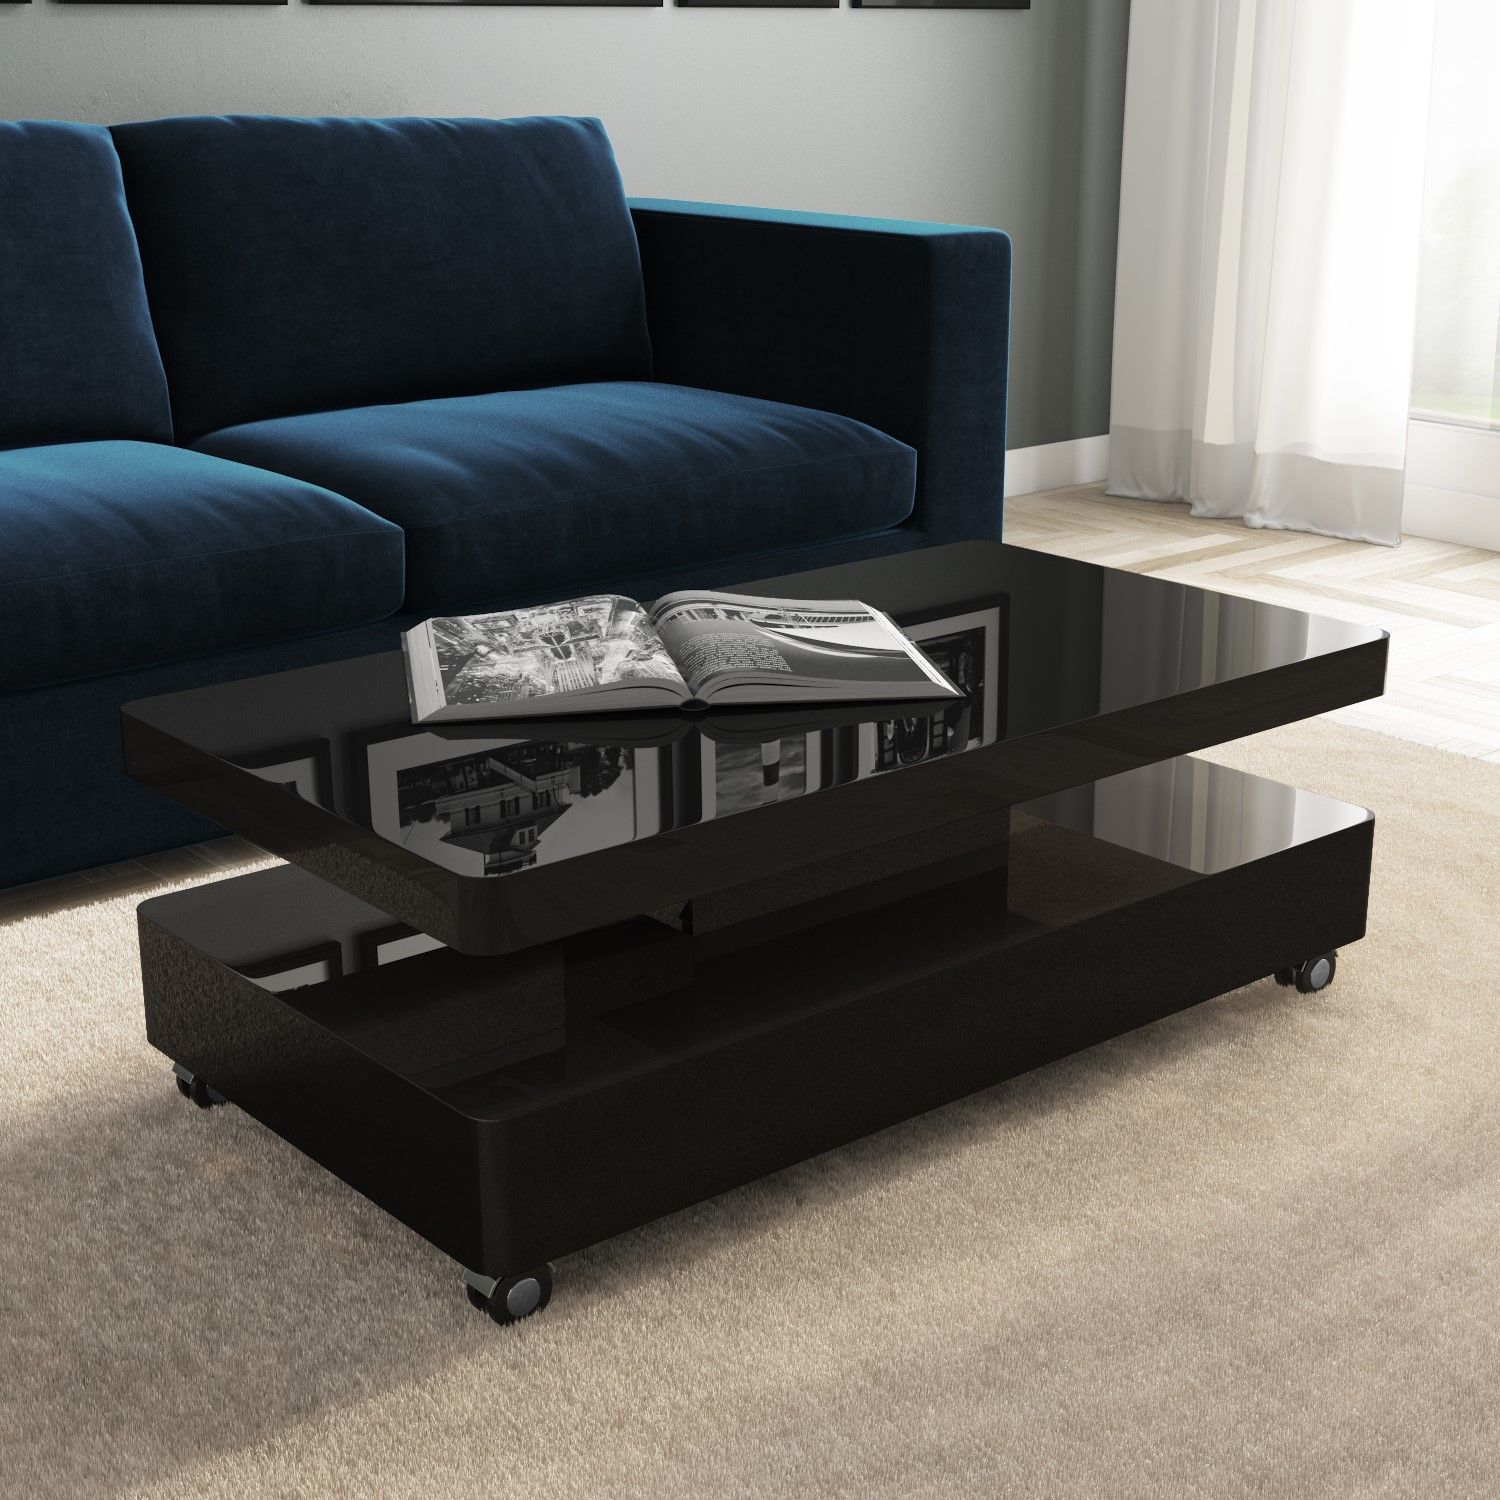 Large Rectangular Black Gloss Led Coffee Table – Tiffany – Furniture123 Within Rectangular Led Coffee Tables (View 3 of 20)